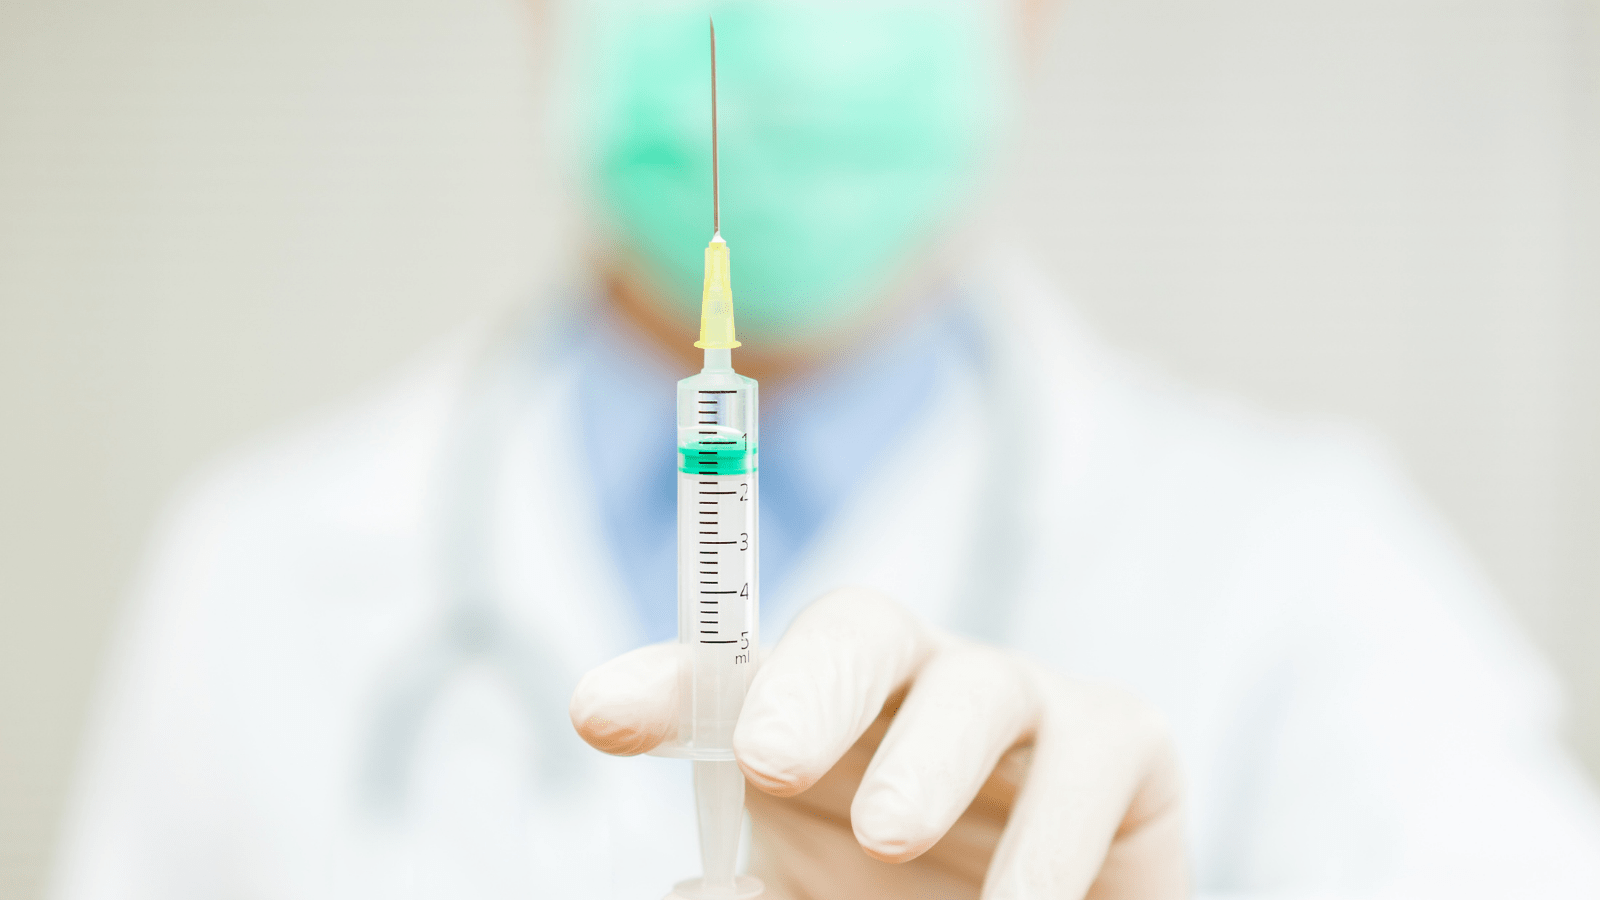 Intracavernosal “Trimix” Injections | Gapin Institute